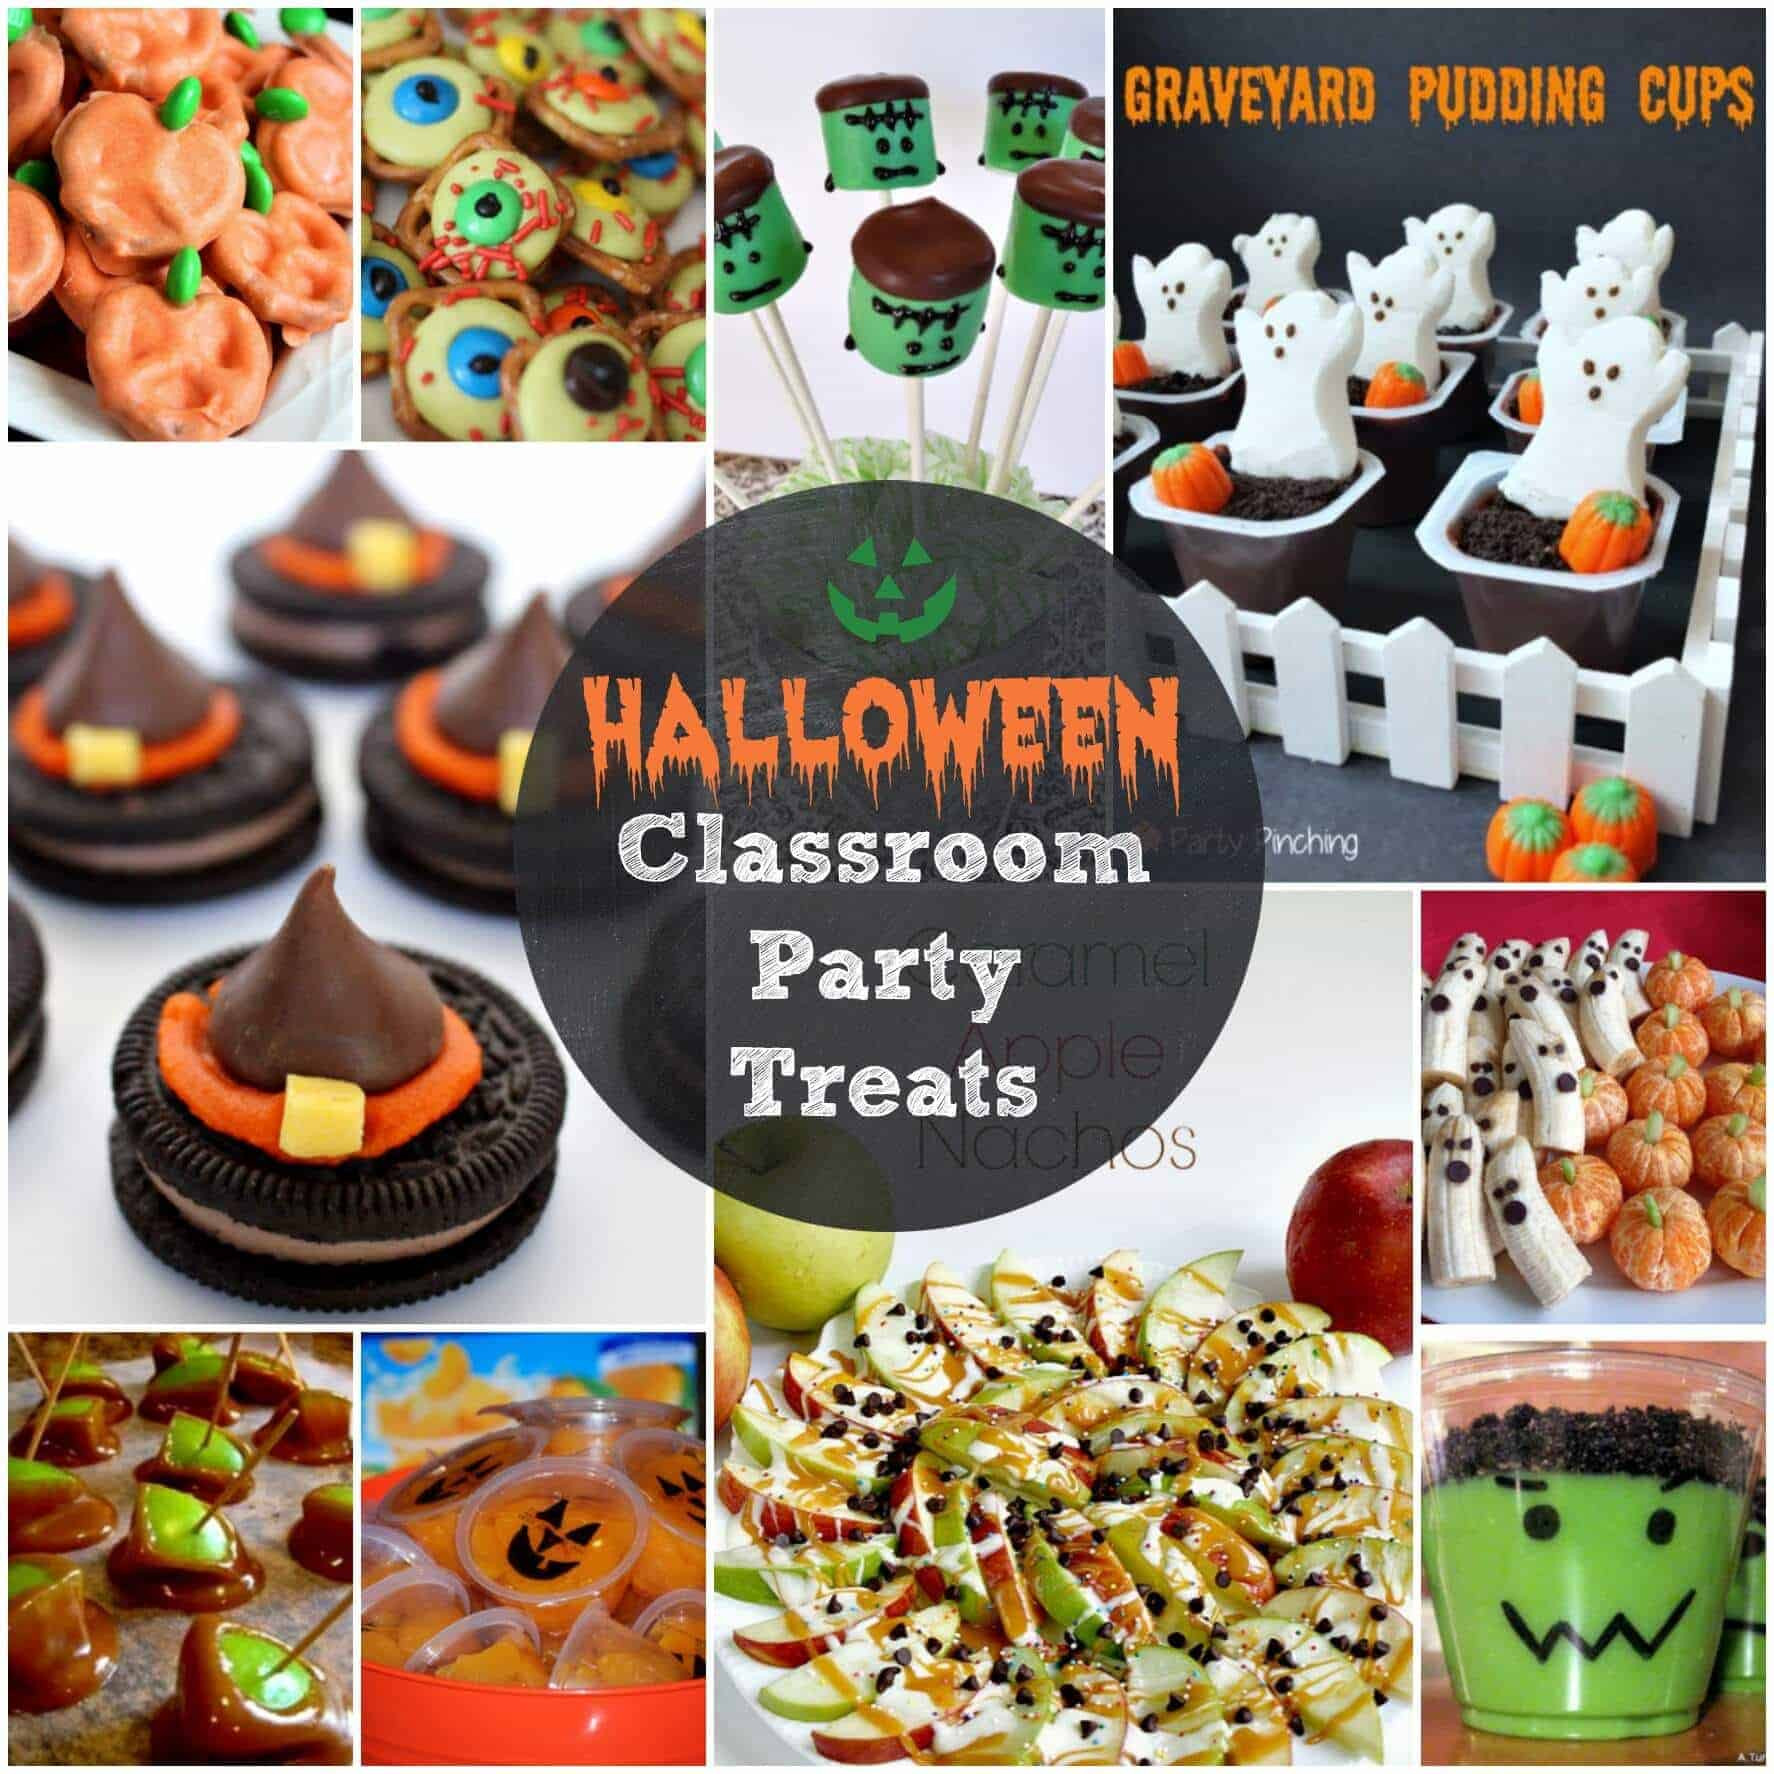 Classroom Halloween Party Ideas
 Fun Halloween Ideas for Kids Page 2 of 2 Princess